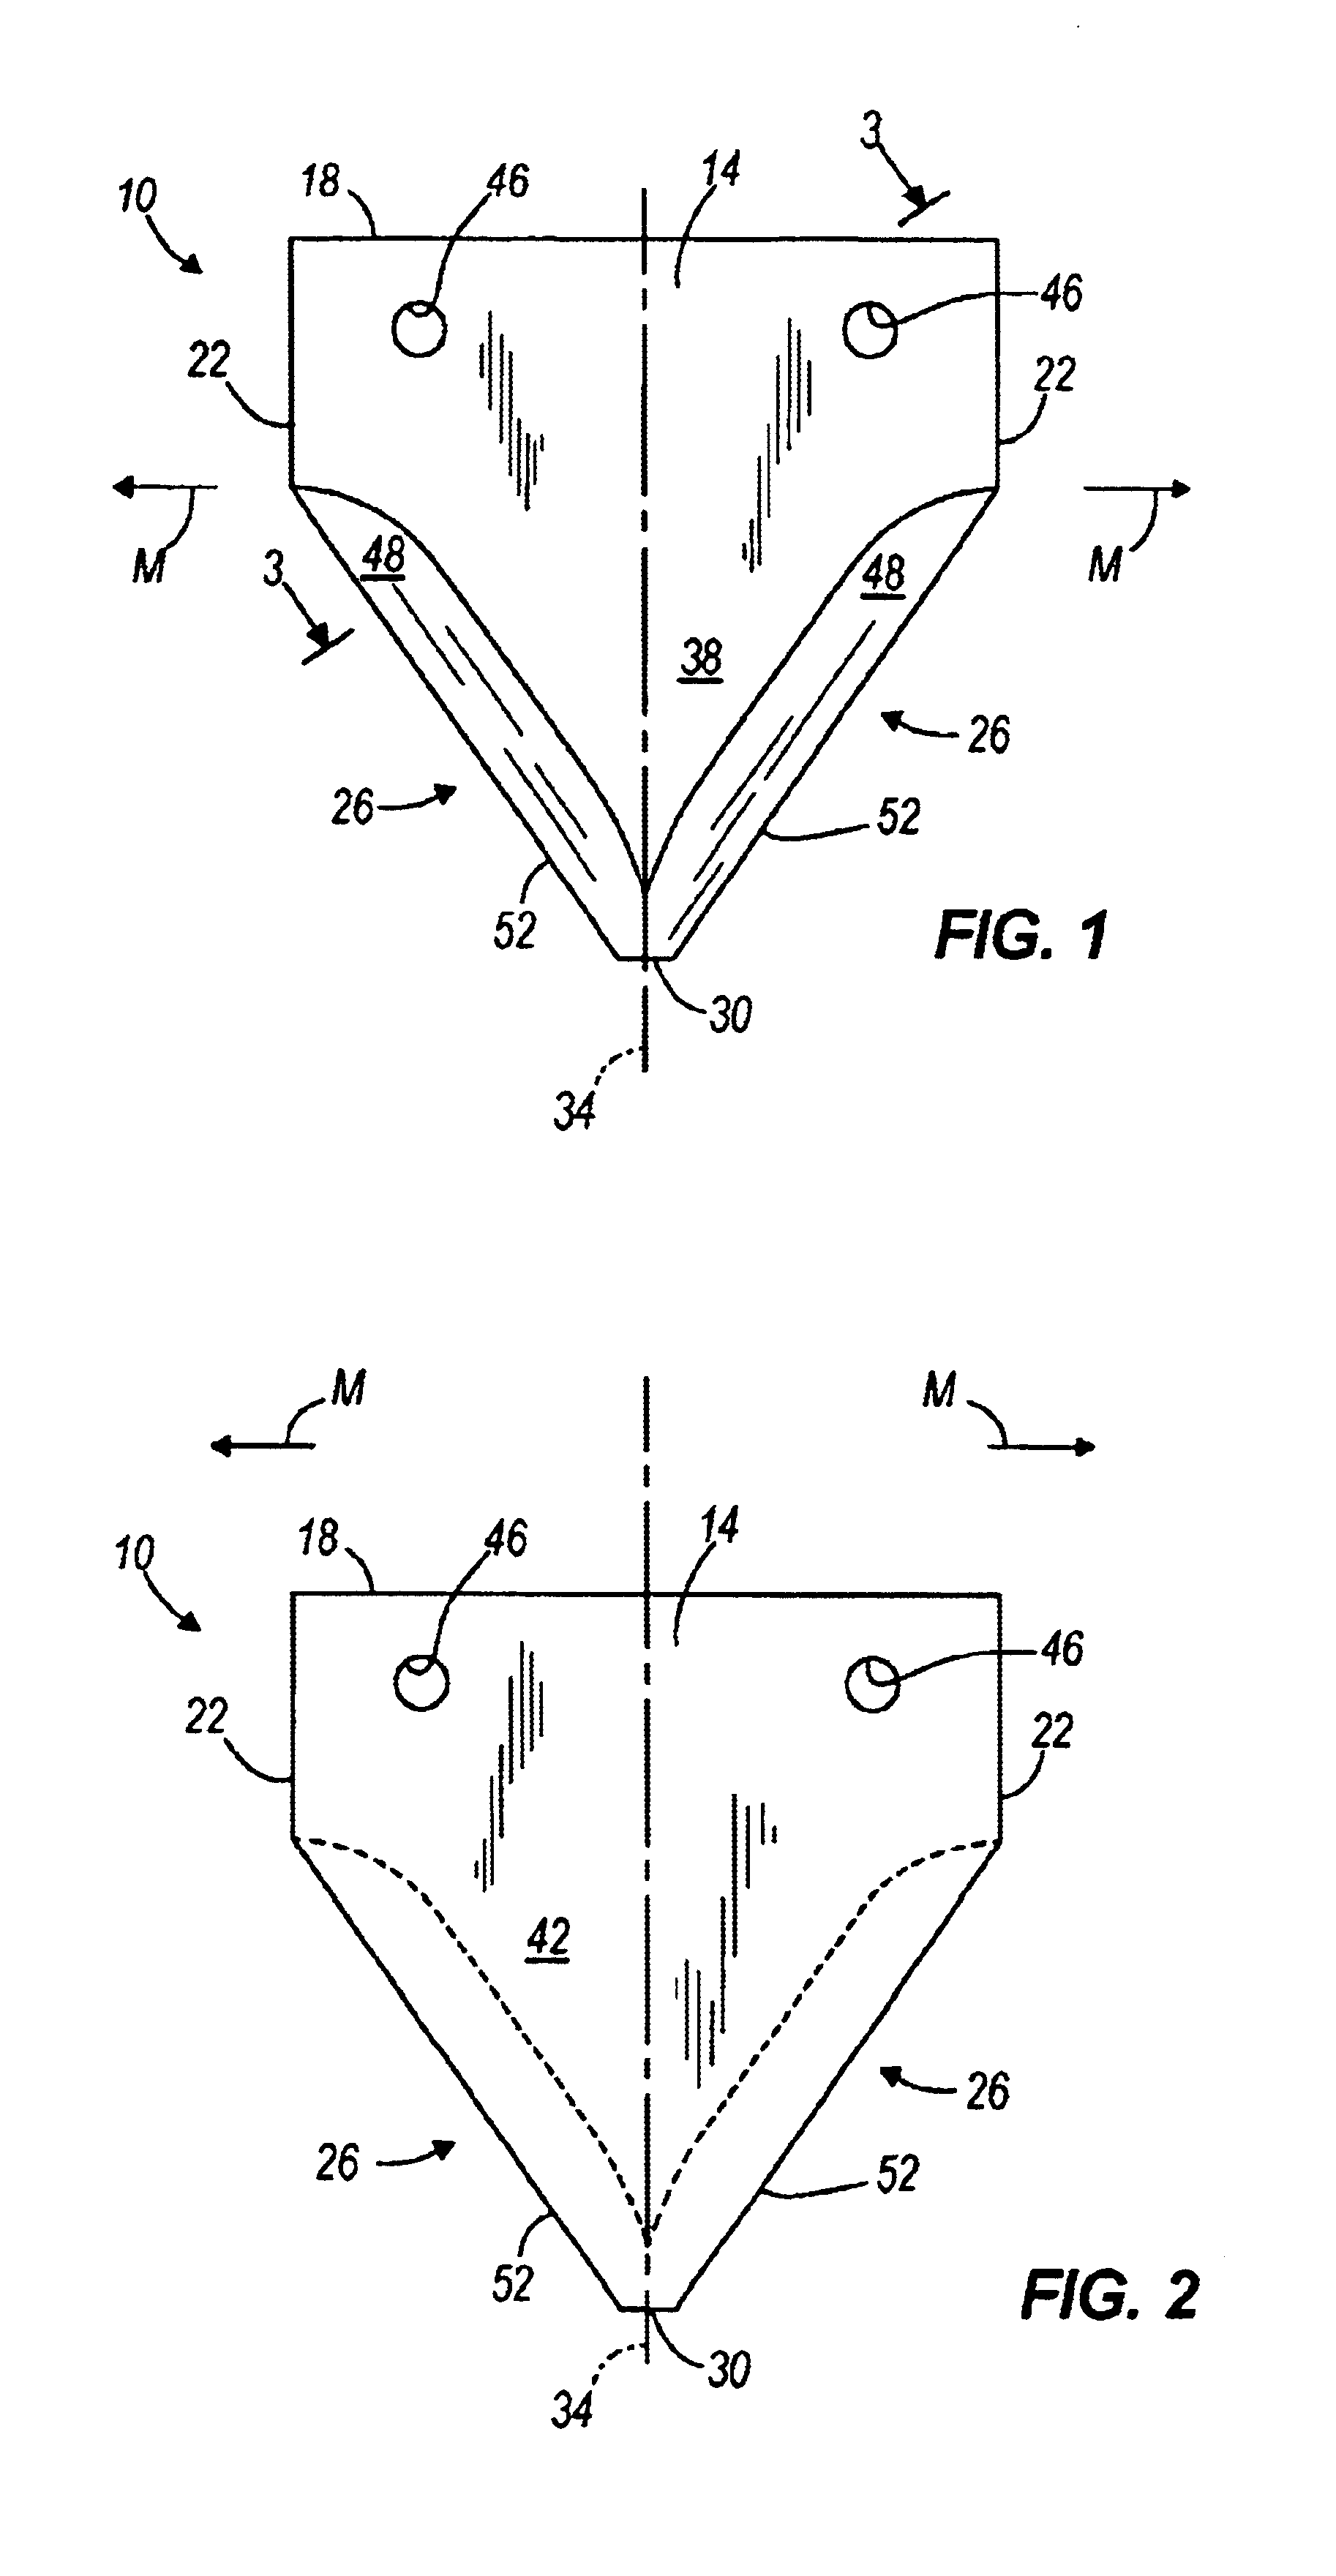 Reciprocating cutting blade having laser-hardened cutting edges and a method for making the same with a laser